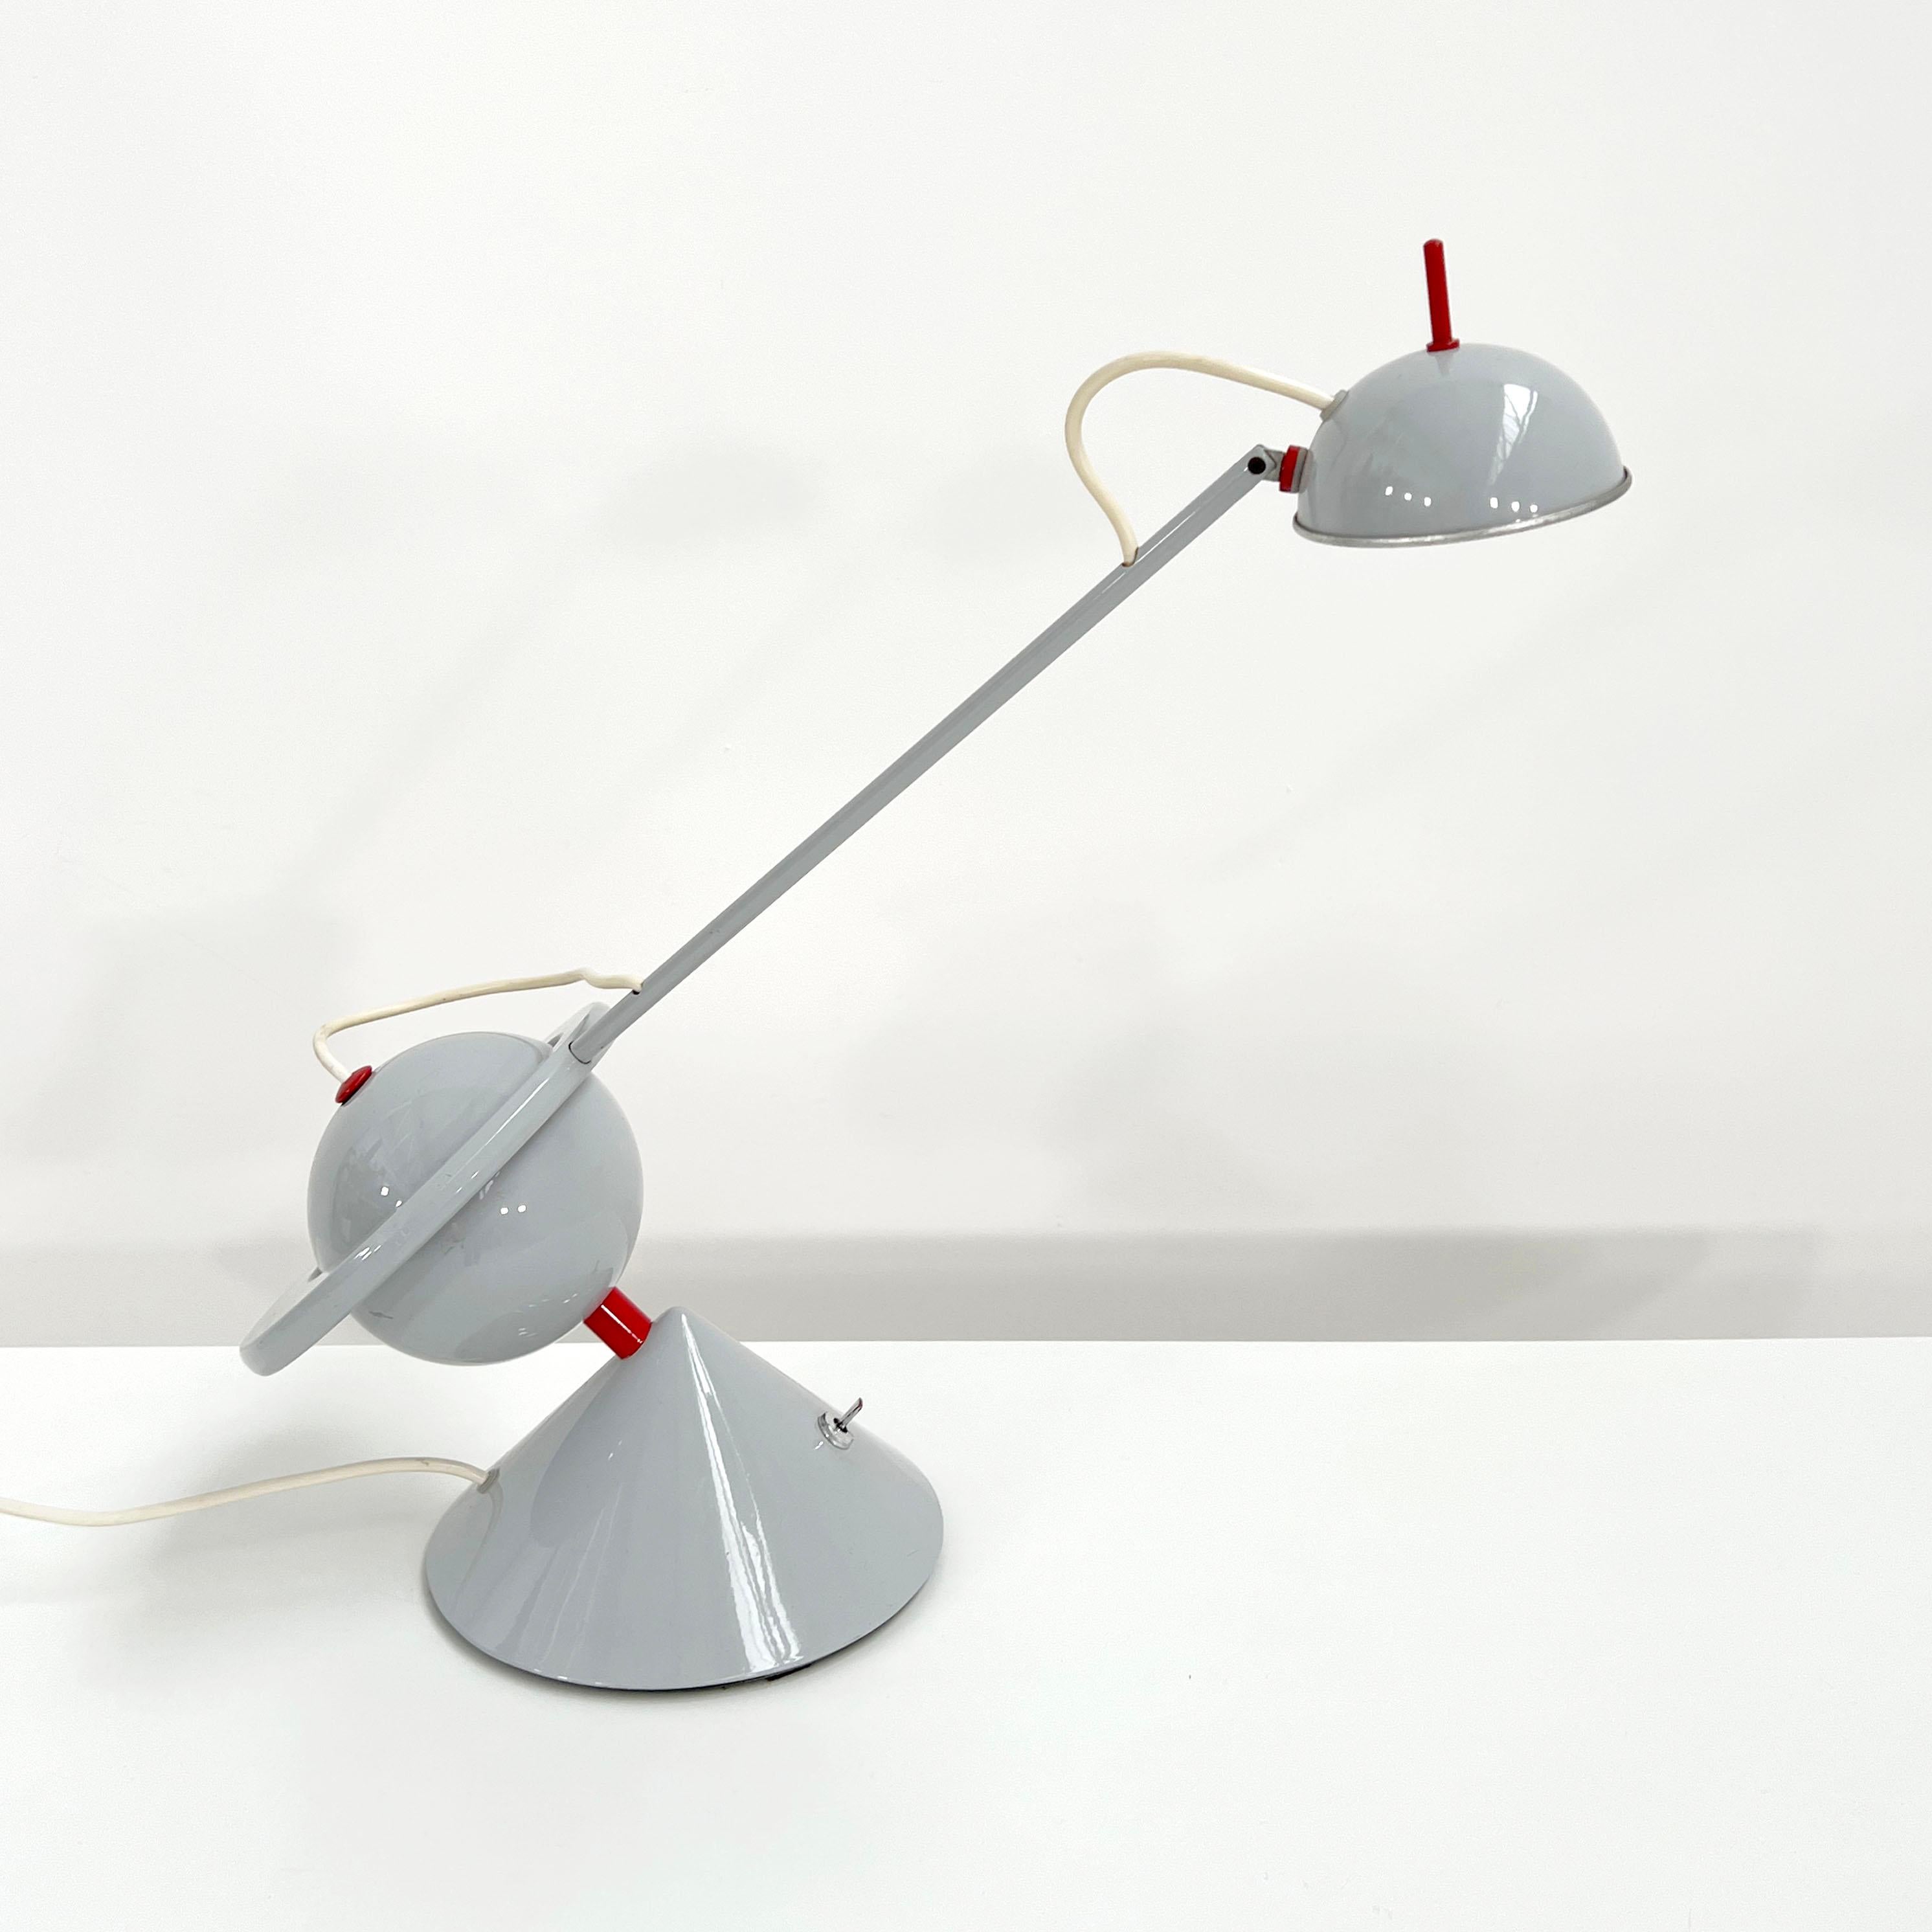 Design Period - Eigthies
Measurements - Width 23 cm x Depth 68 cm x Height 50 cm
Materials - Metal
Color - Grey, Red
Light wear consistent with age and use. 